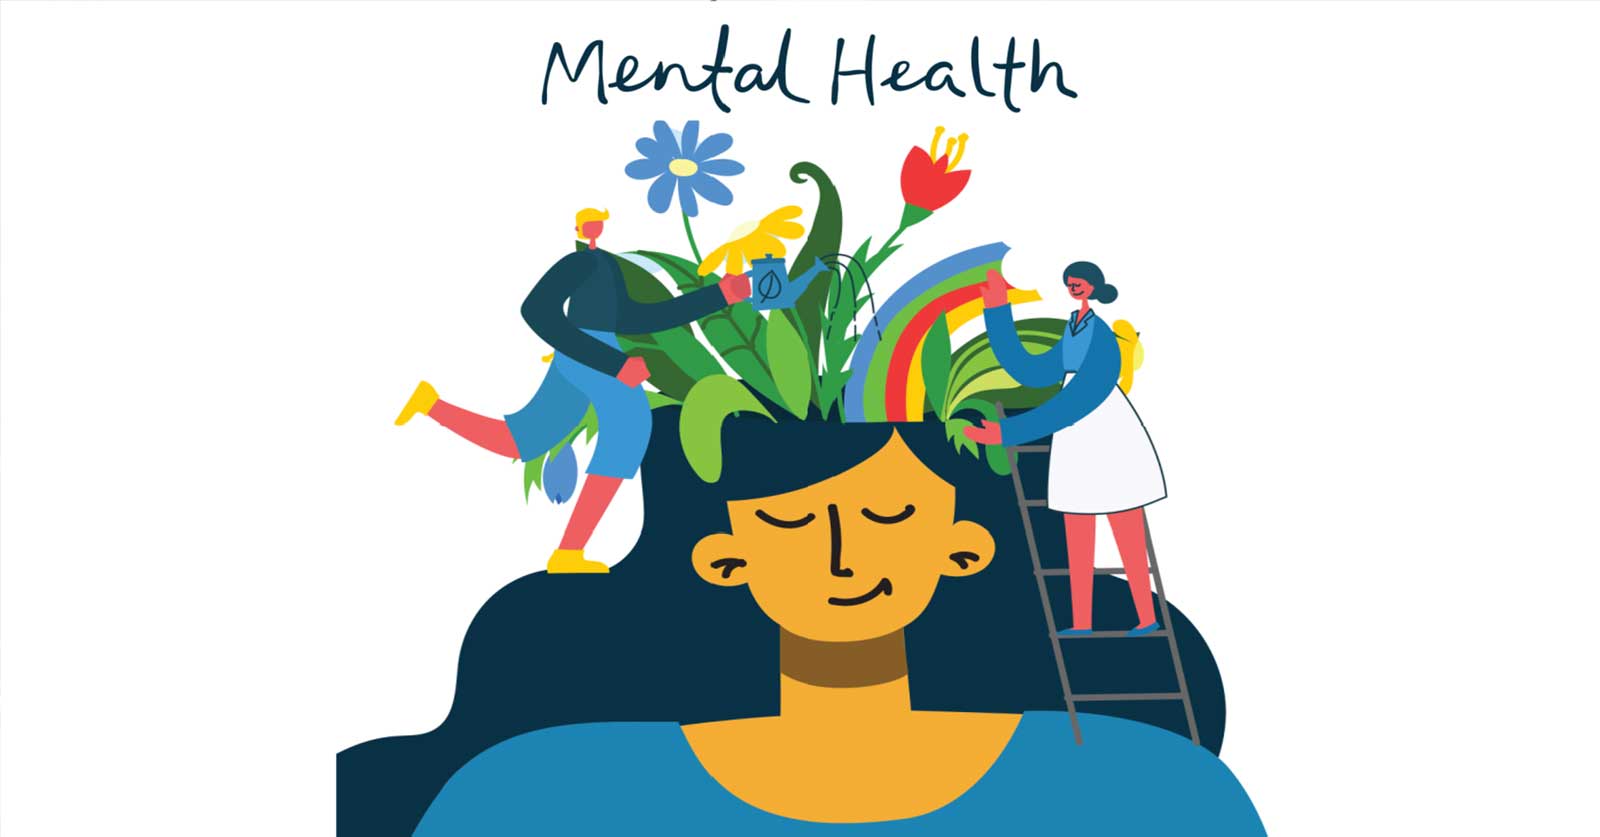 May Is Mental Health Month